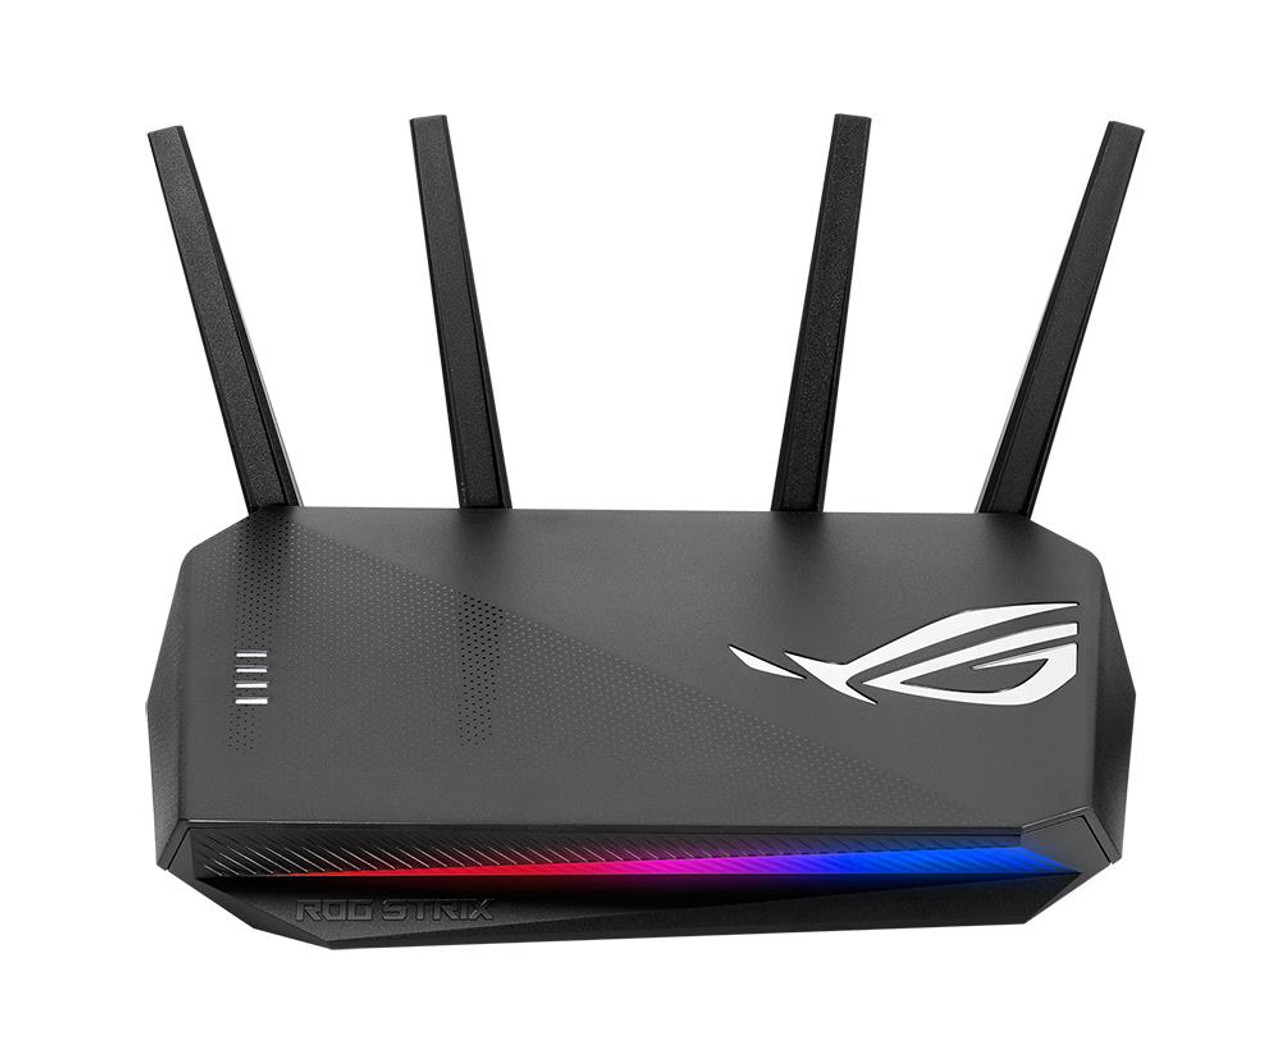 GS-AX3000 ASUS ROG Strix AX3000 WiFi 6 Gaming Router (Refurbished)